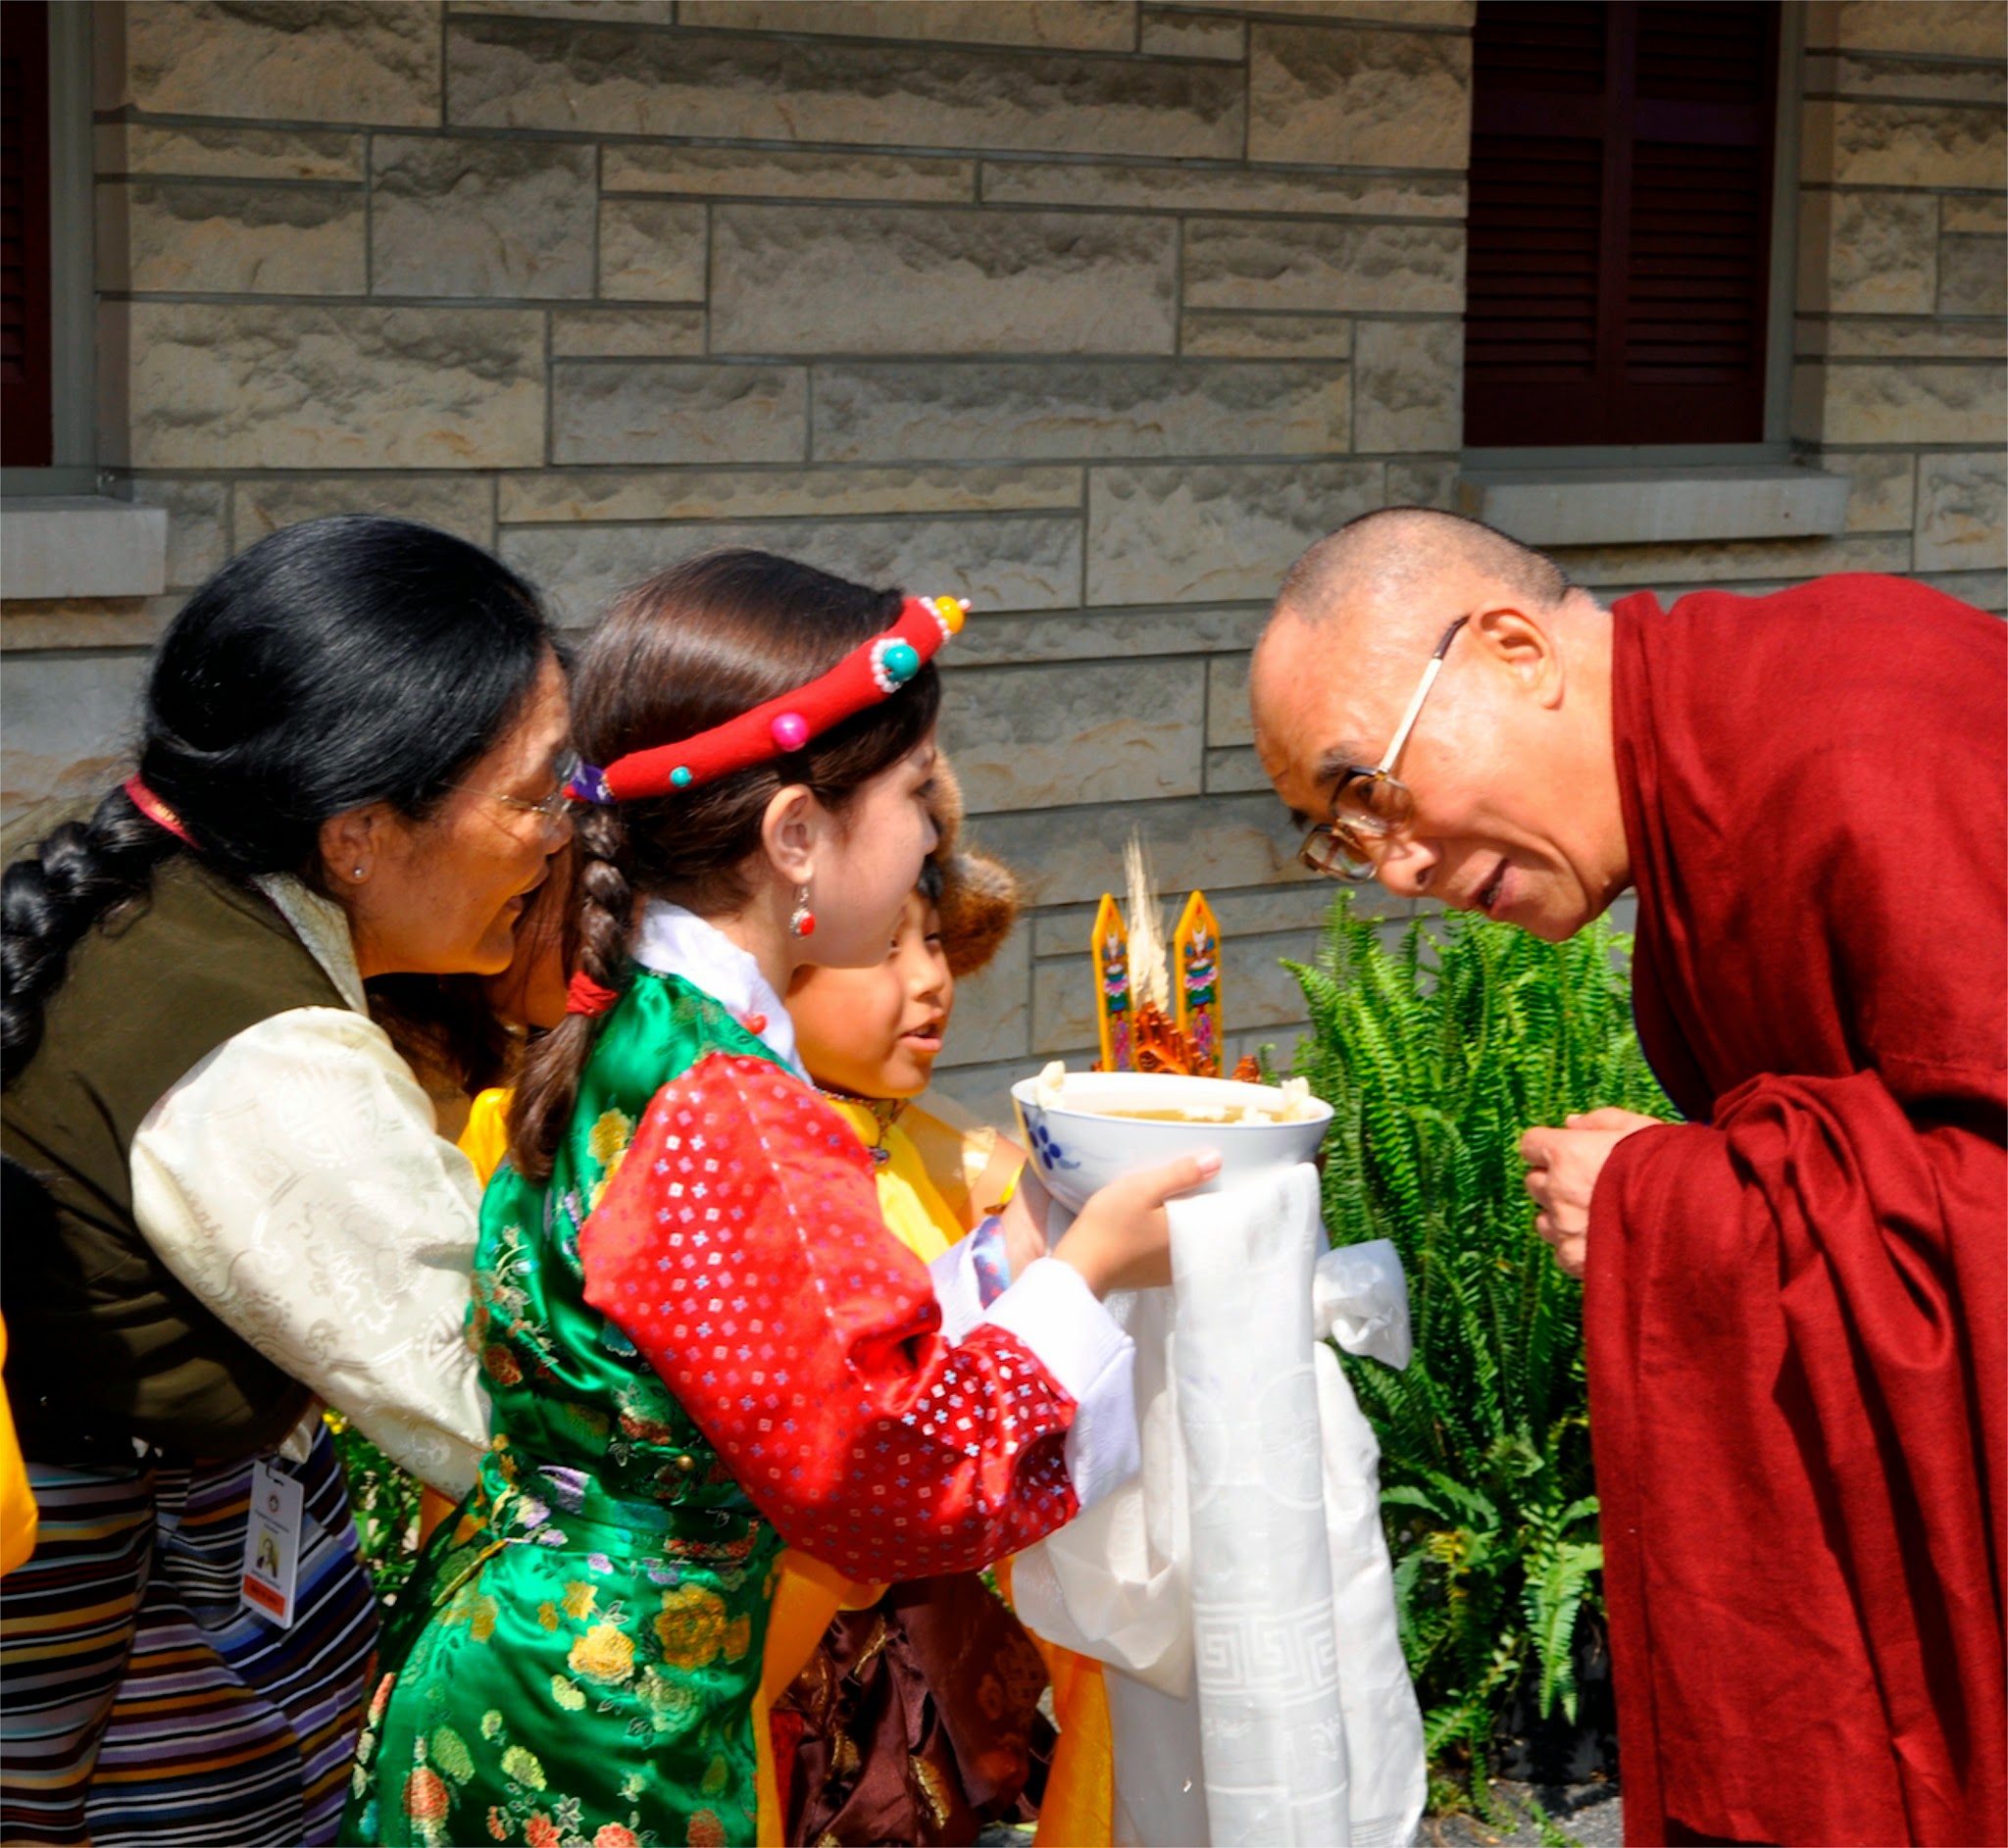 His Holiness greets children before the blessing.